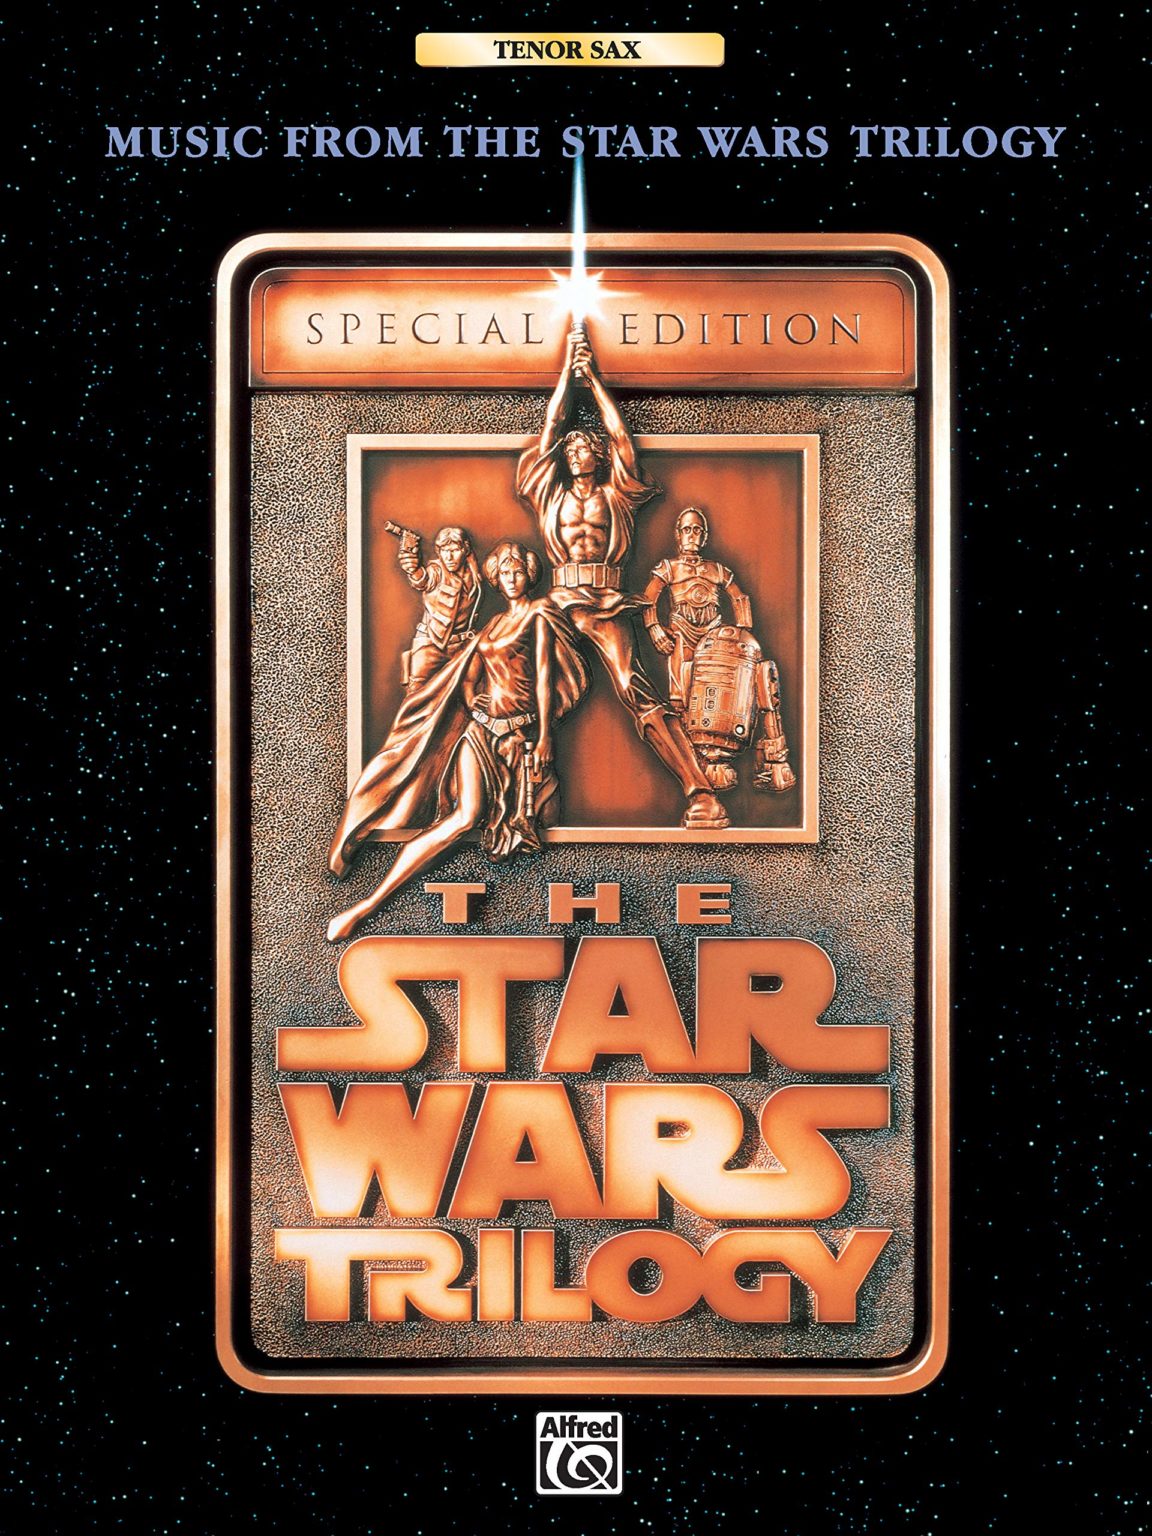 Music from 'The Star Wars Trilogy' para saxofón tenor solo. John Williams